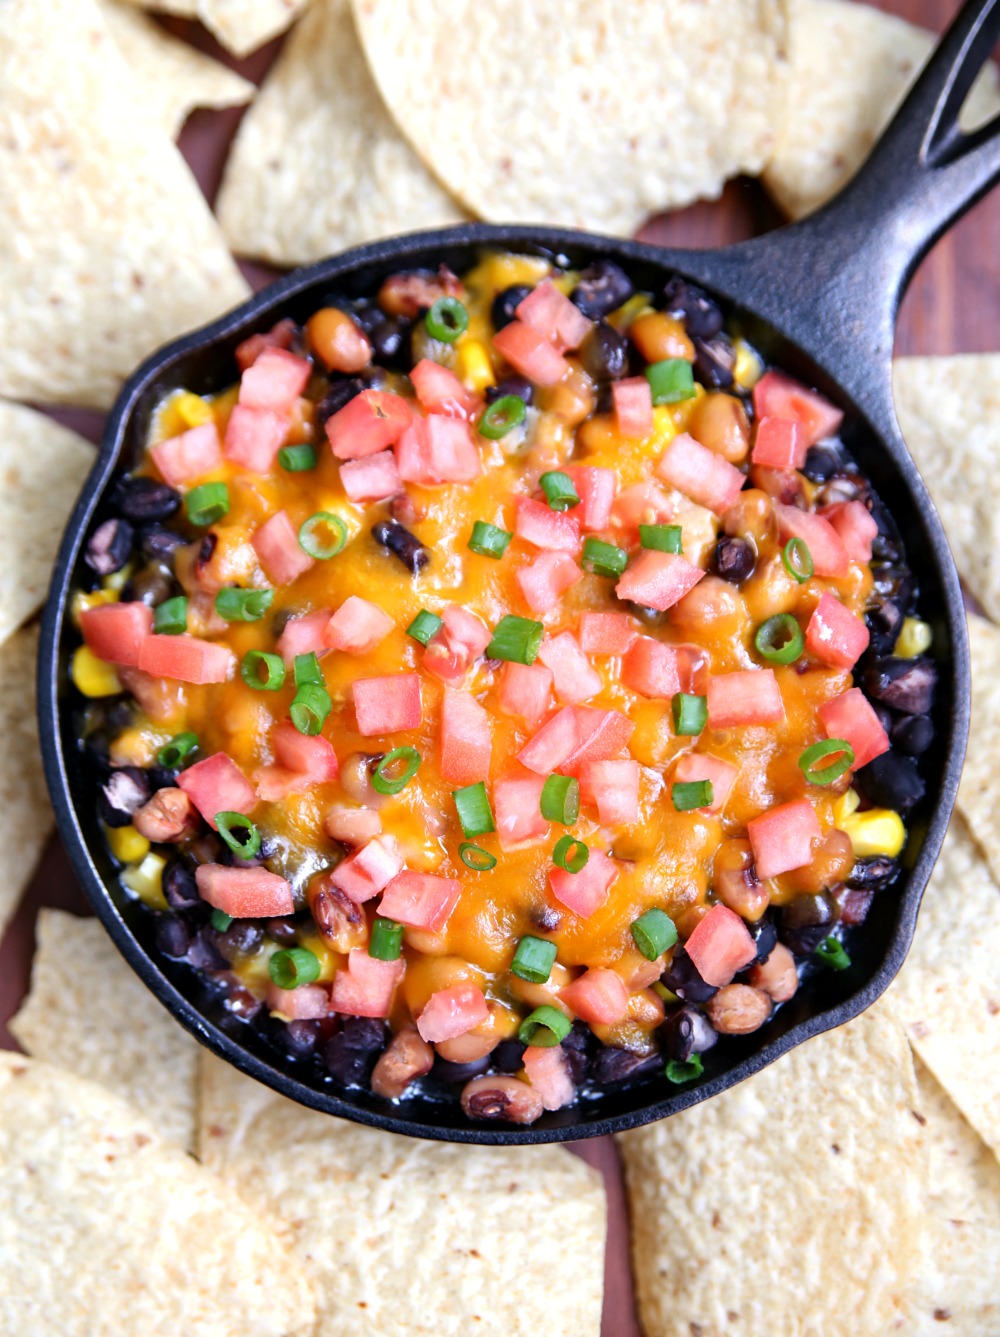 New Year's Bean and Cheese Dip